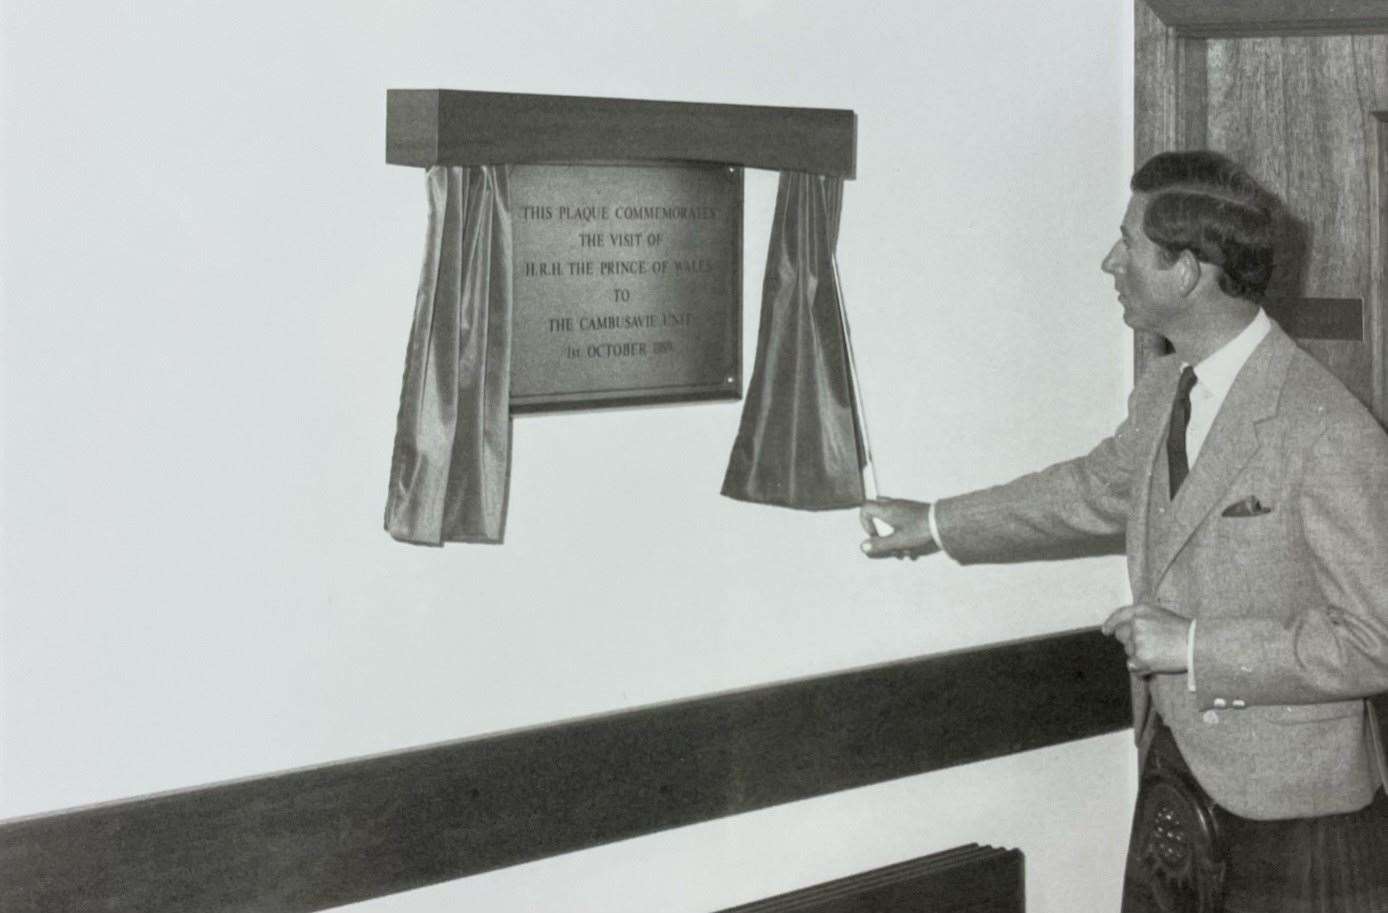 Prince Charles unveils a plaque commemorating his visit to the Lawson Memorial Hospital, Golspie.